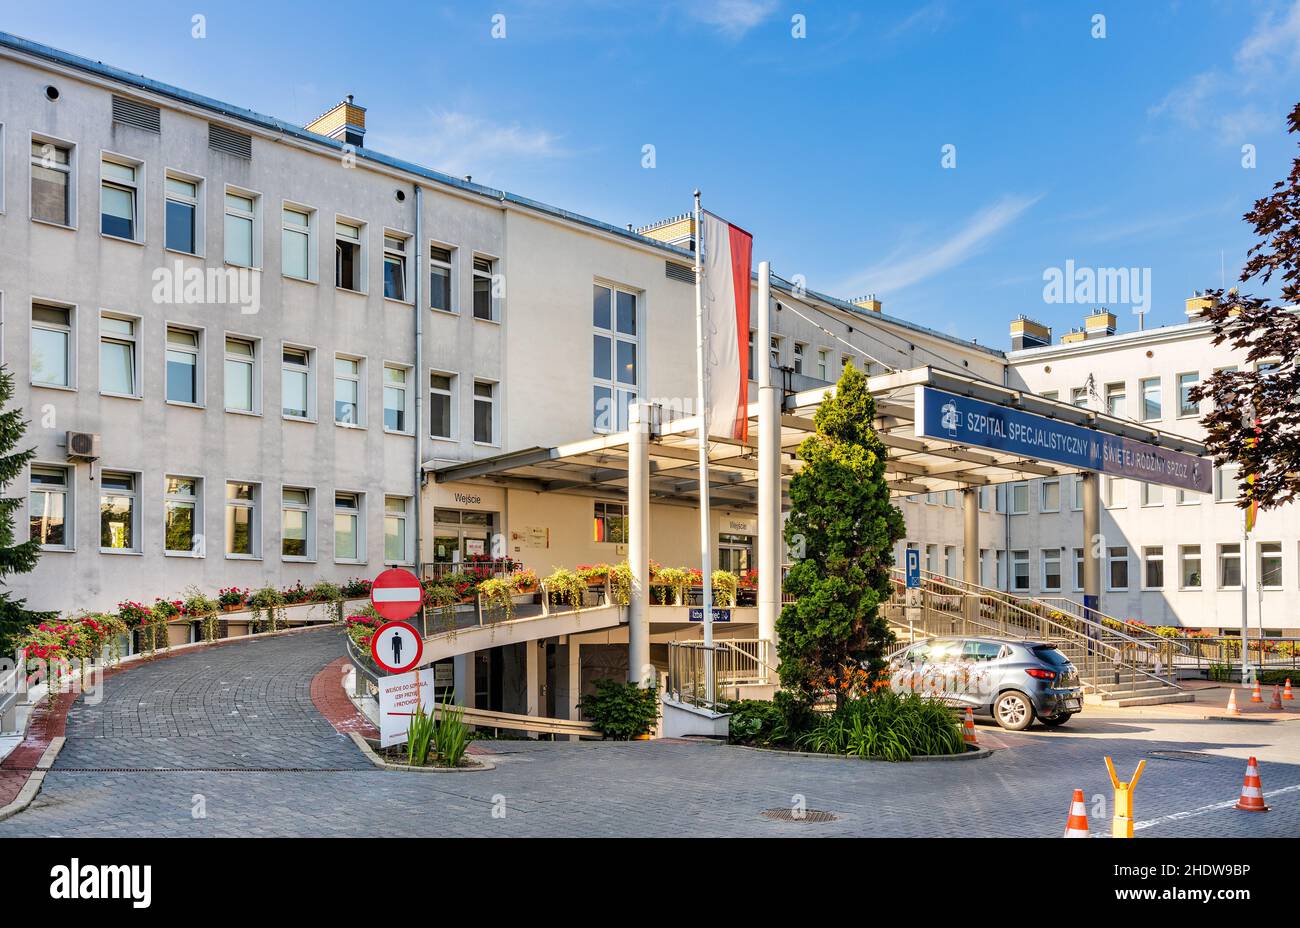 Warsaw, Poland - July 11, 2021: Holy Family specialistic hospital and medical center at 25 Madalinskiego street in Mokotow district of Warsaw Stock Photo